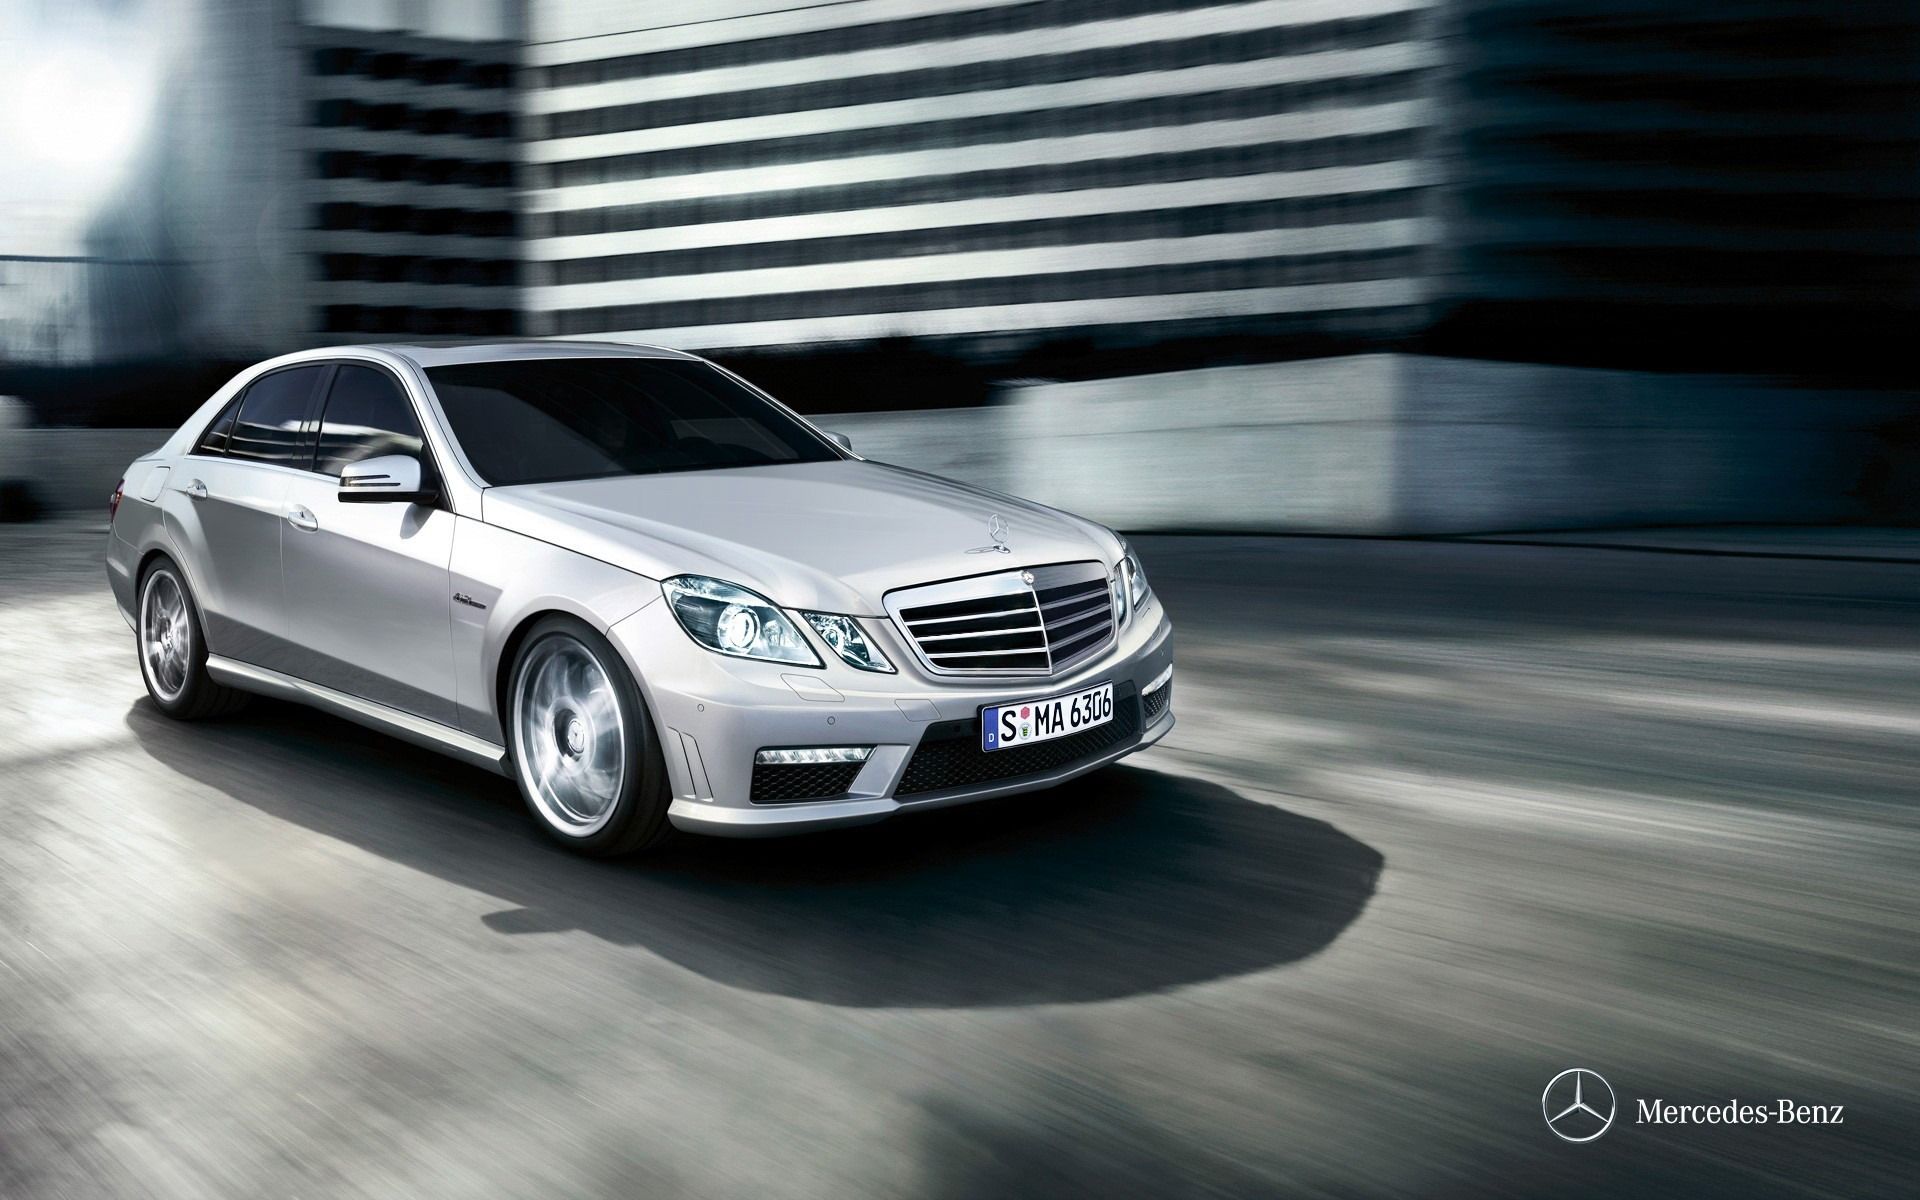 Mercedes-Benz E-Class HQ Wallpapers | Full HD Pictures